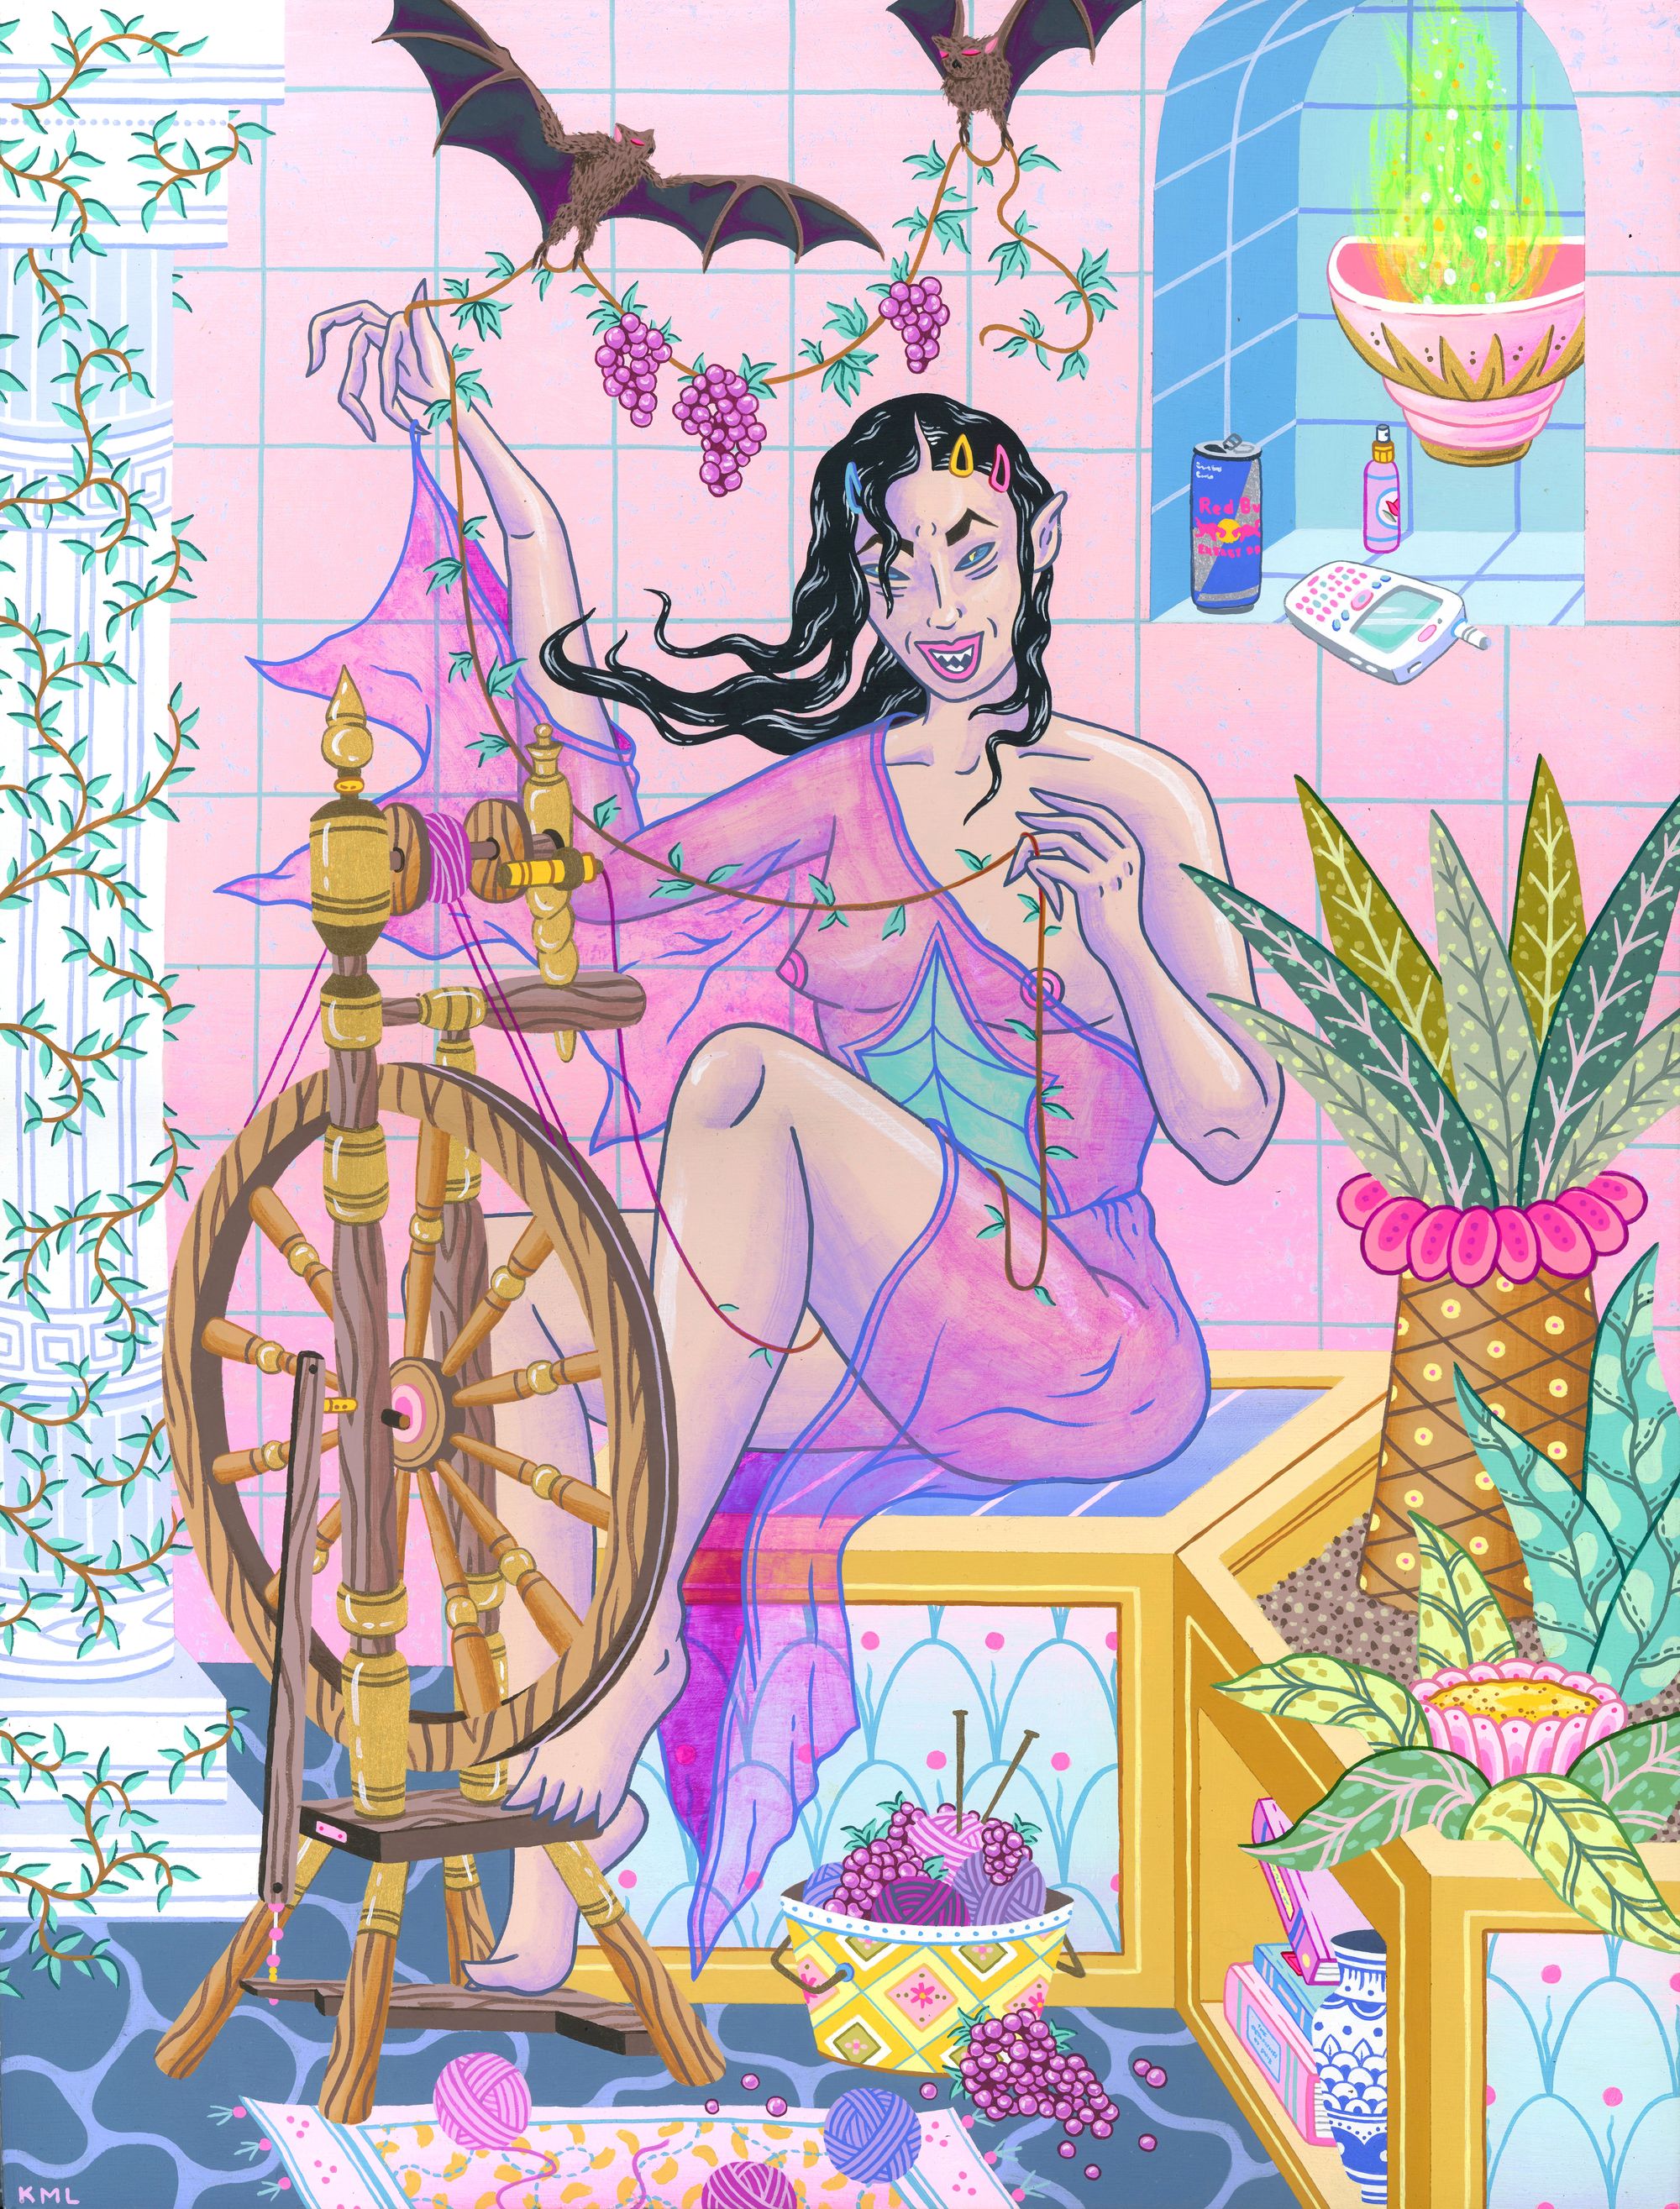 Artist Kristen Liu-Wong's painting titled Spinning Yarns depicts a raven-haired woman sheathed in a swath of sheer pink fabric, sitting behind a spinning wheel, spinning pink yarns. She is surrounded by plants, and has two bats dangling three clusters of grapes above her head.